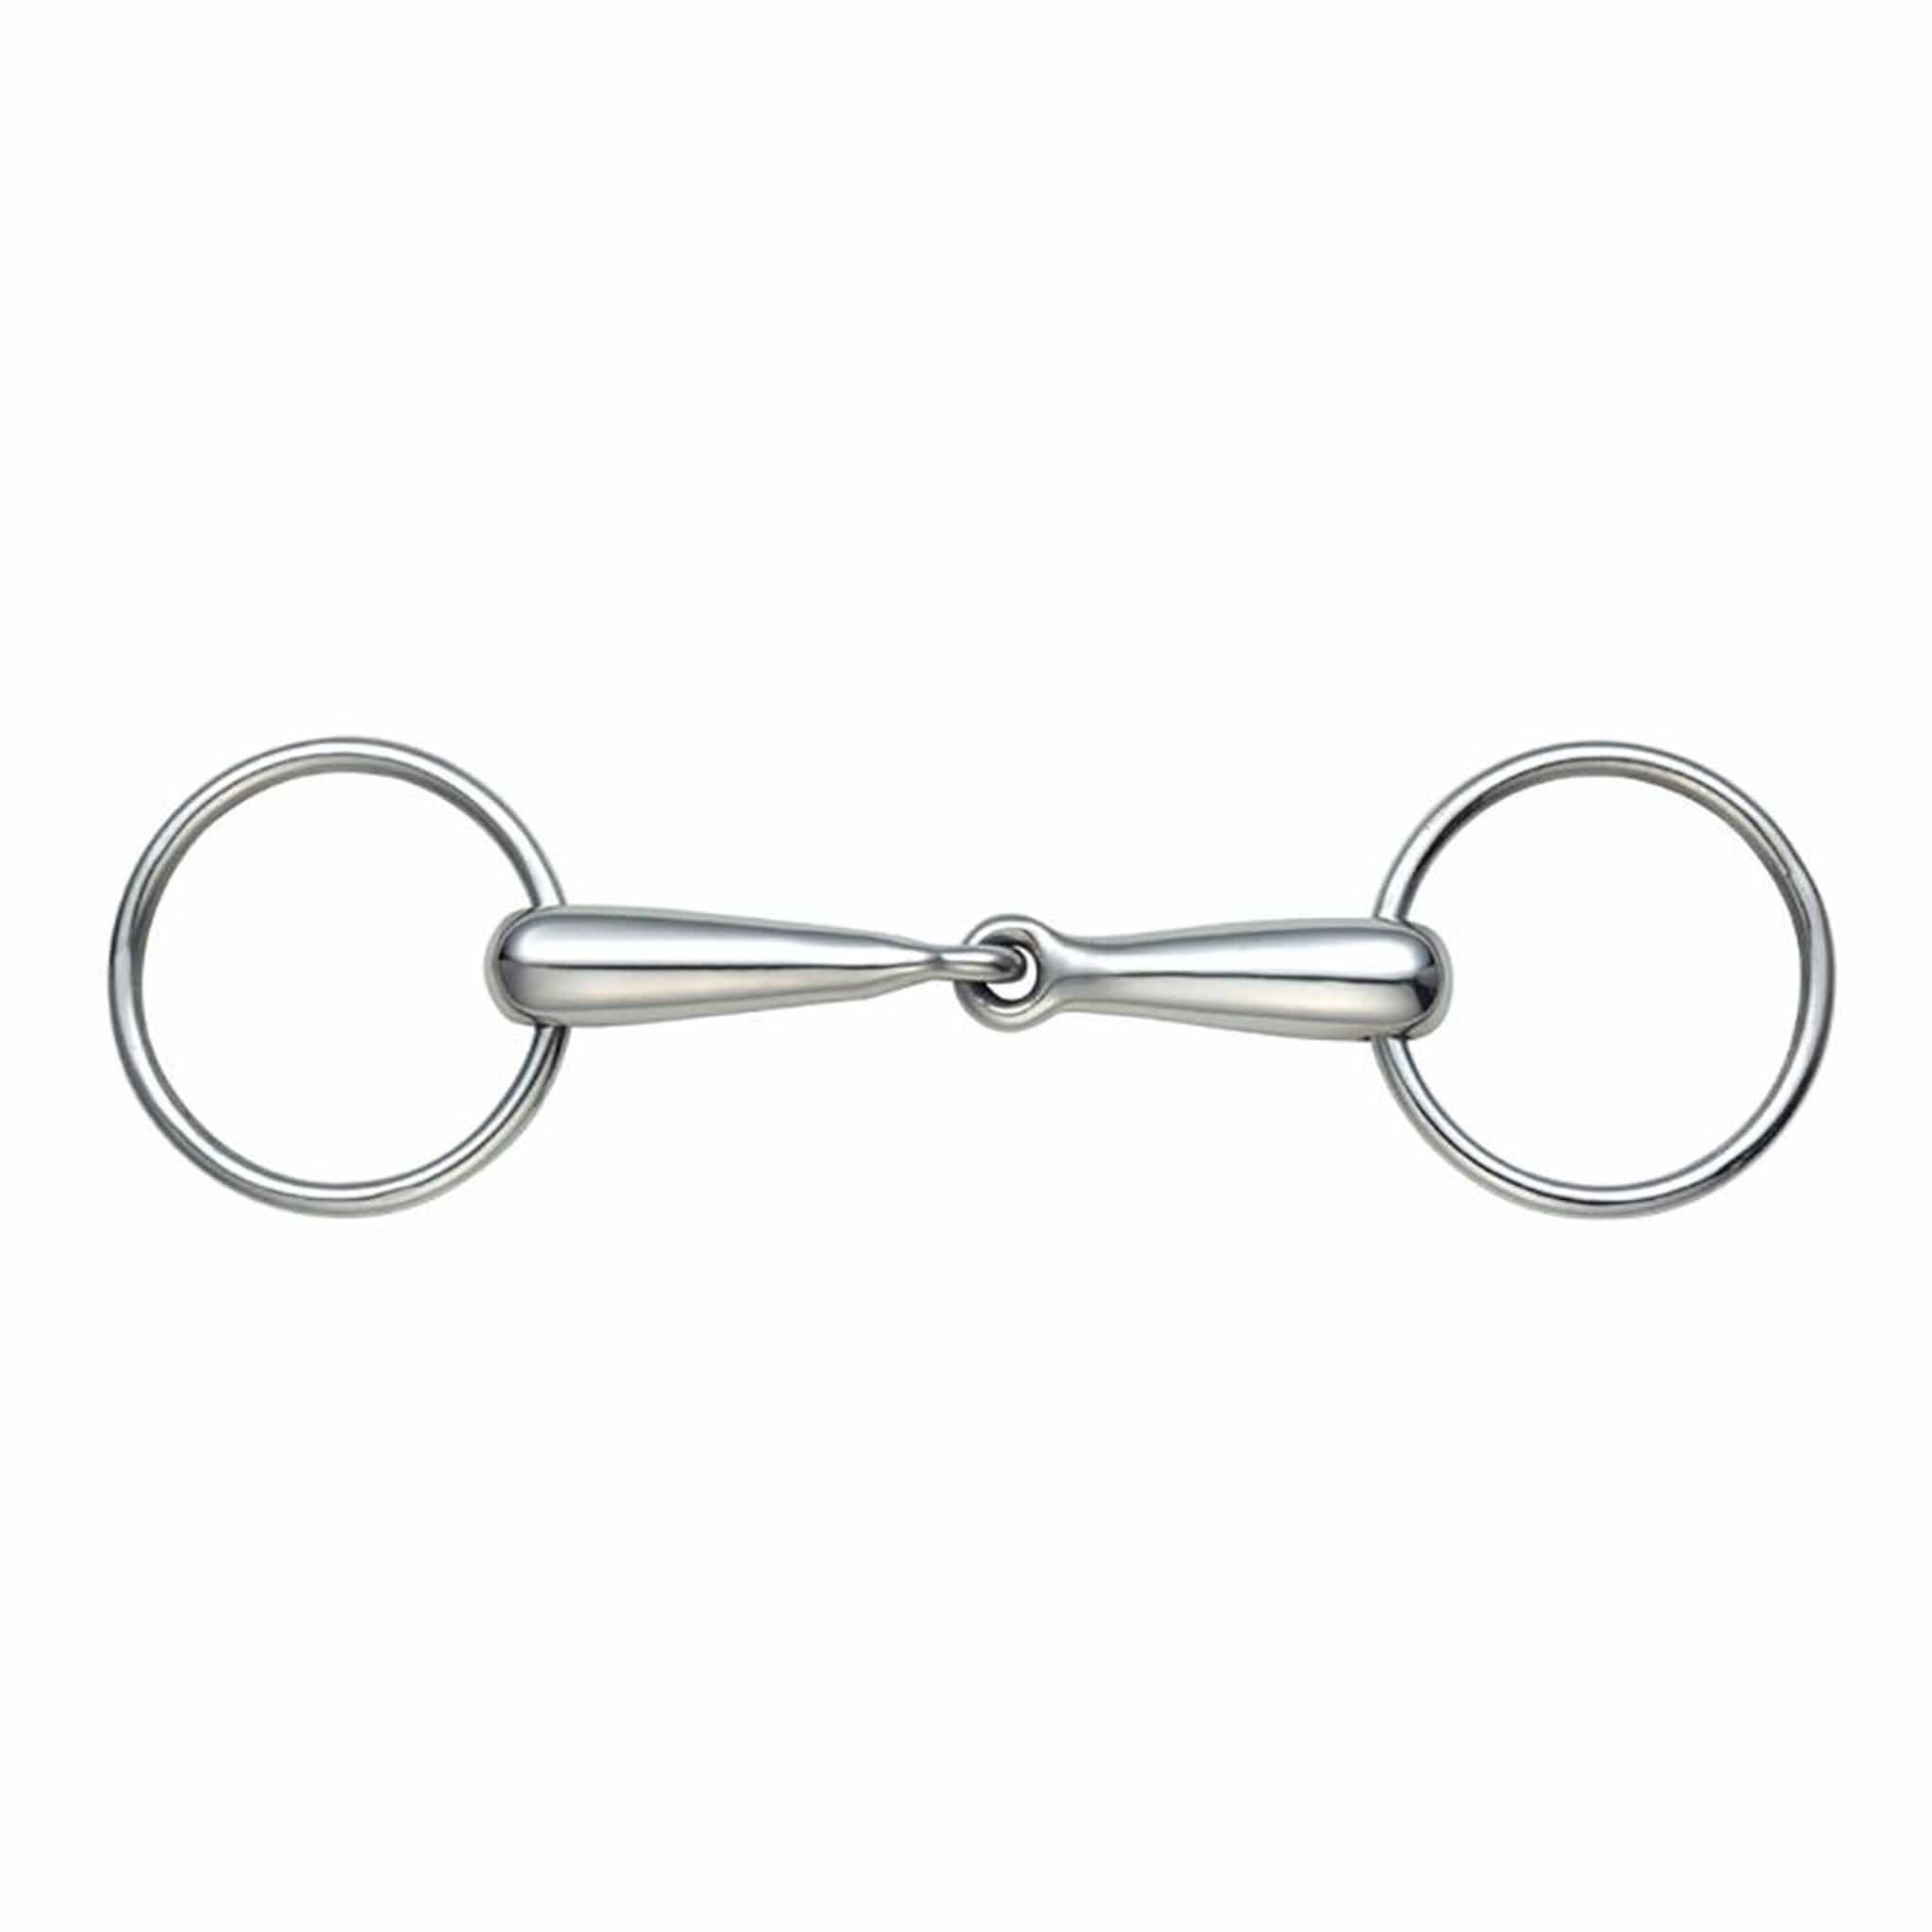 Shires Hollow Mouth Loose Ring Snaffle Bit 559